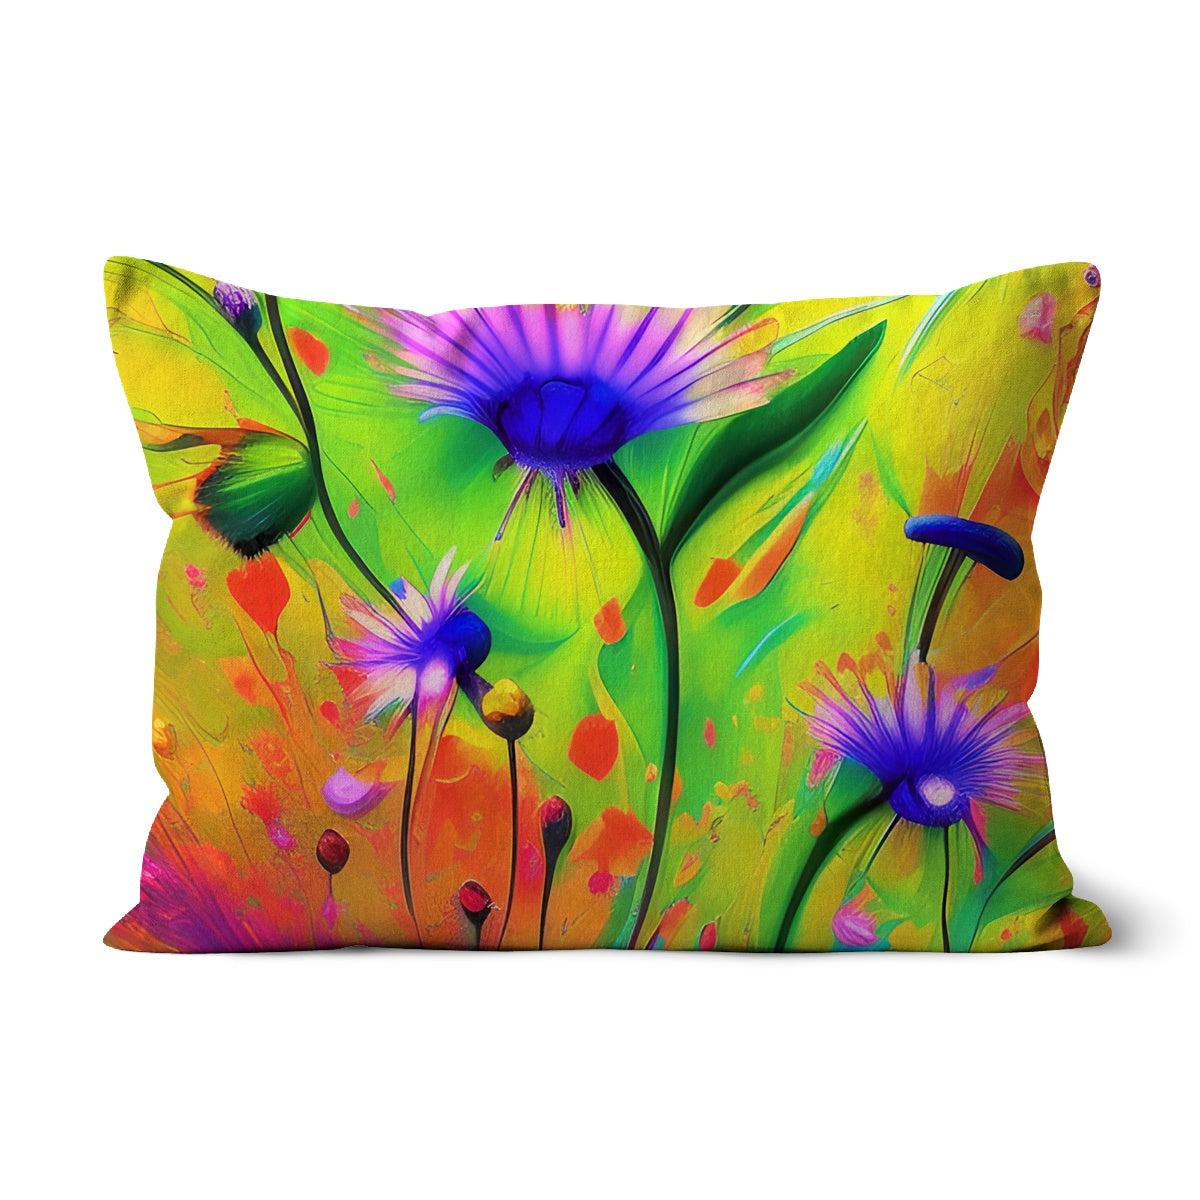 Painted Flowers Cushion